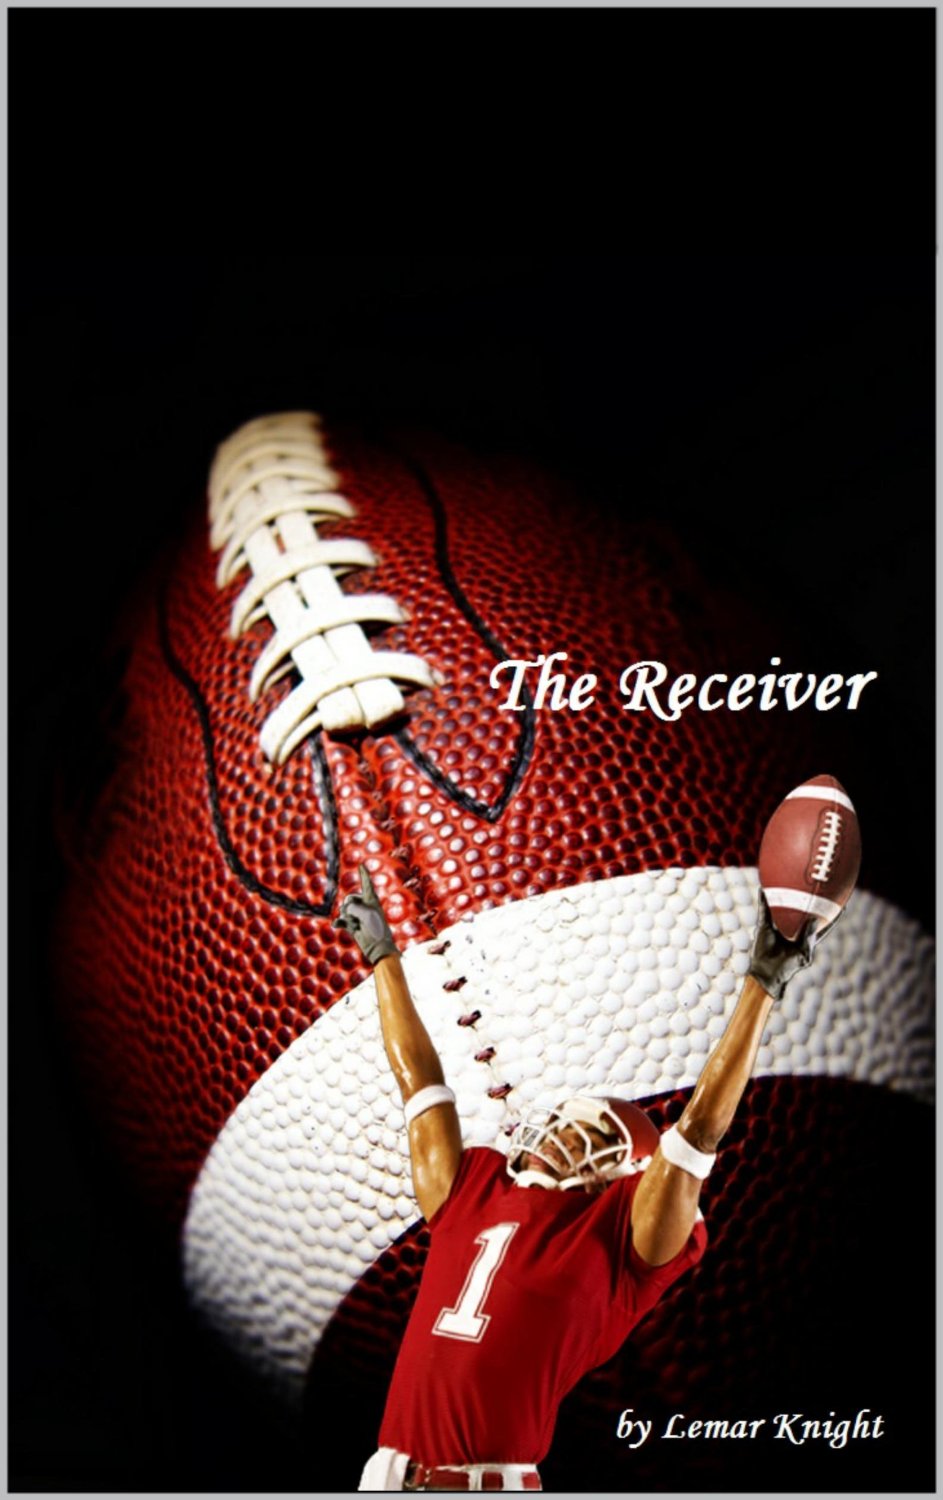 The Receiver by Lemar Knight